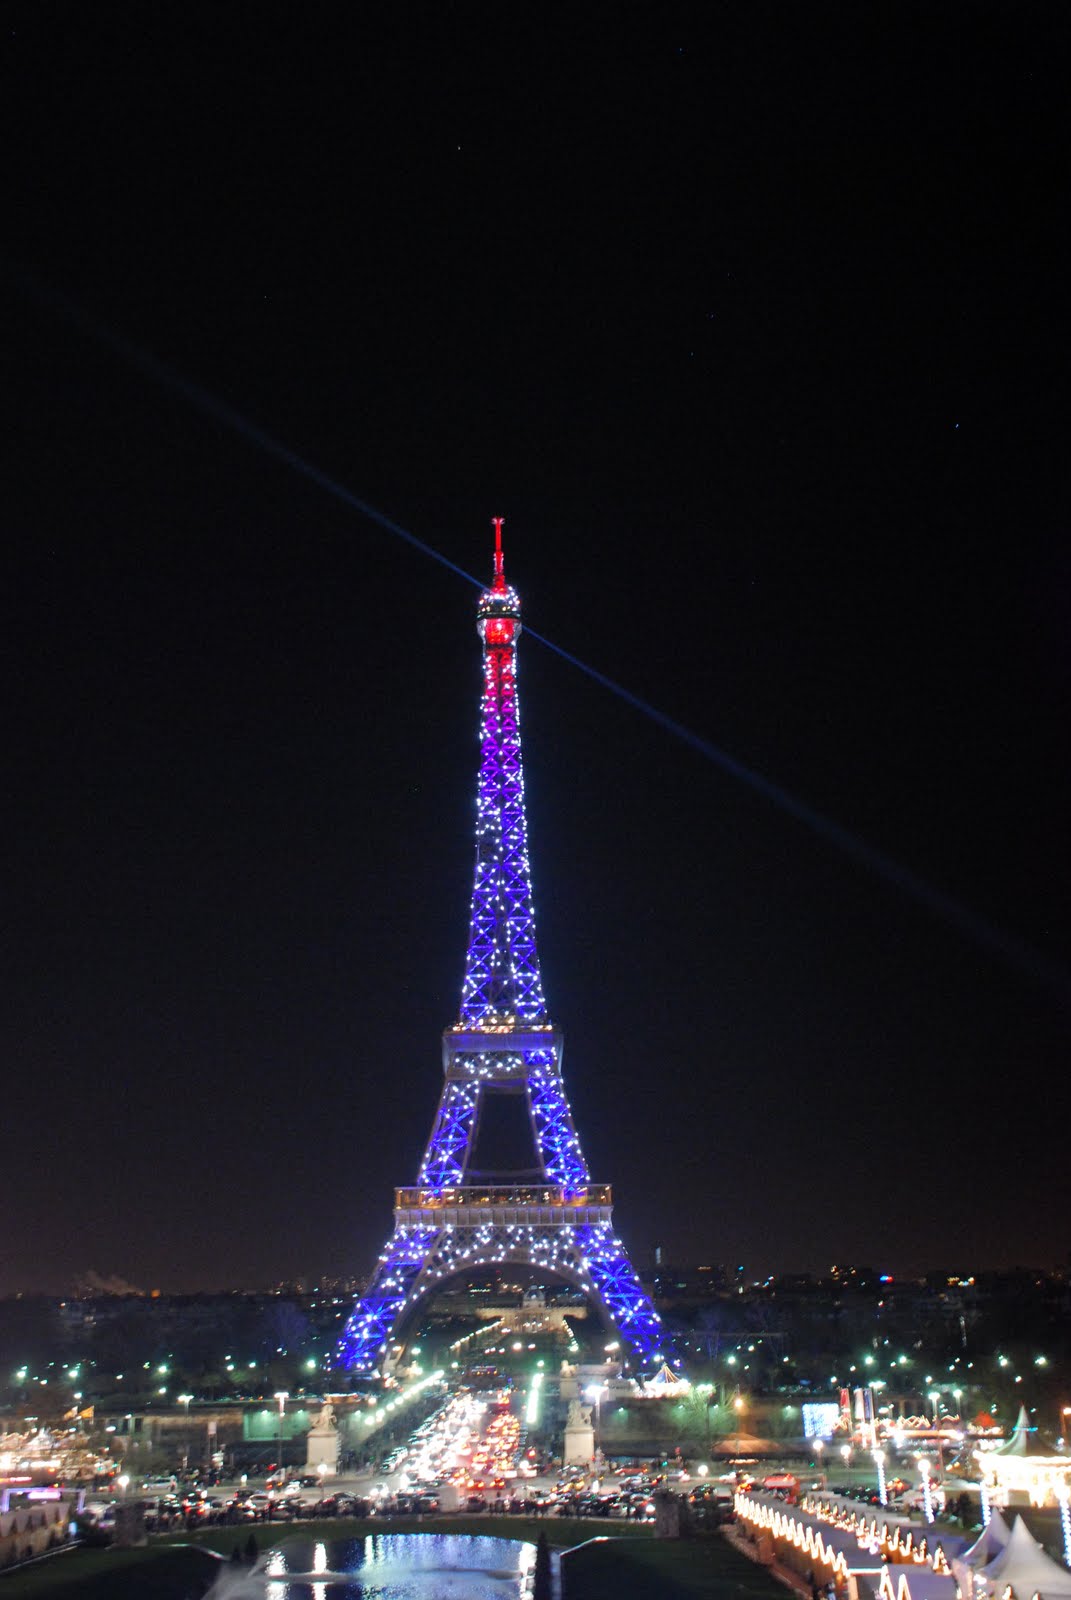 Flowers and more: Eiffel Tower Under Christmas Lights